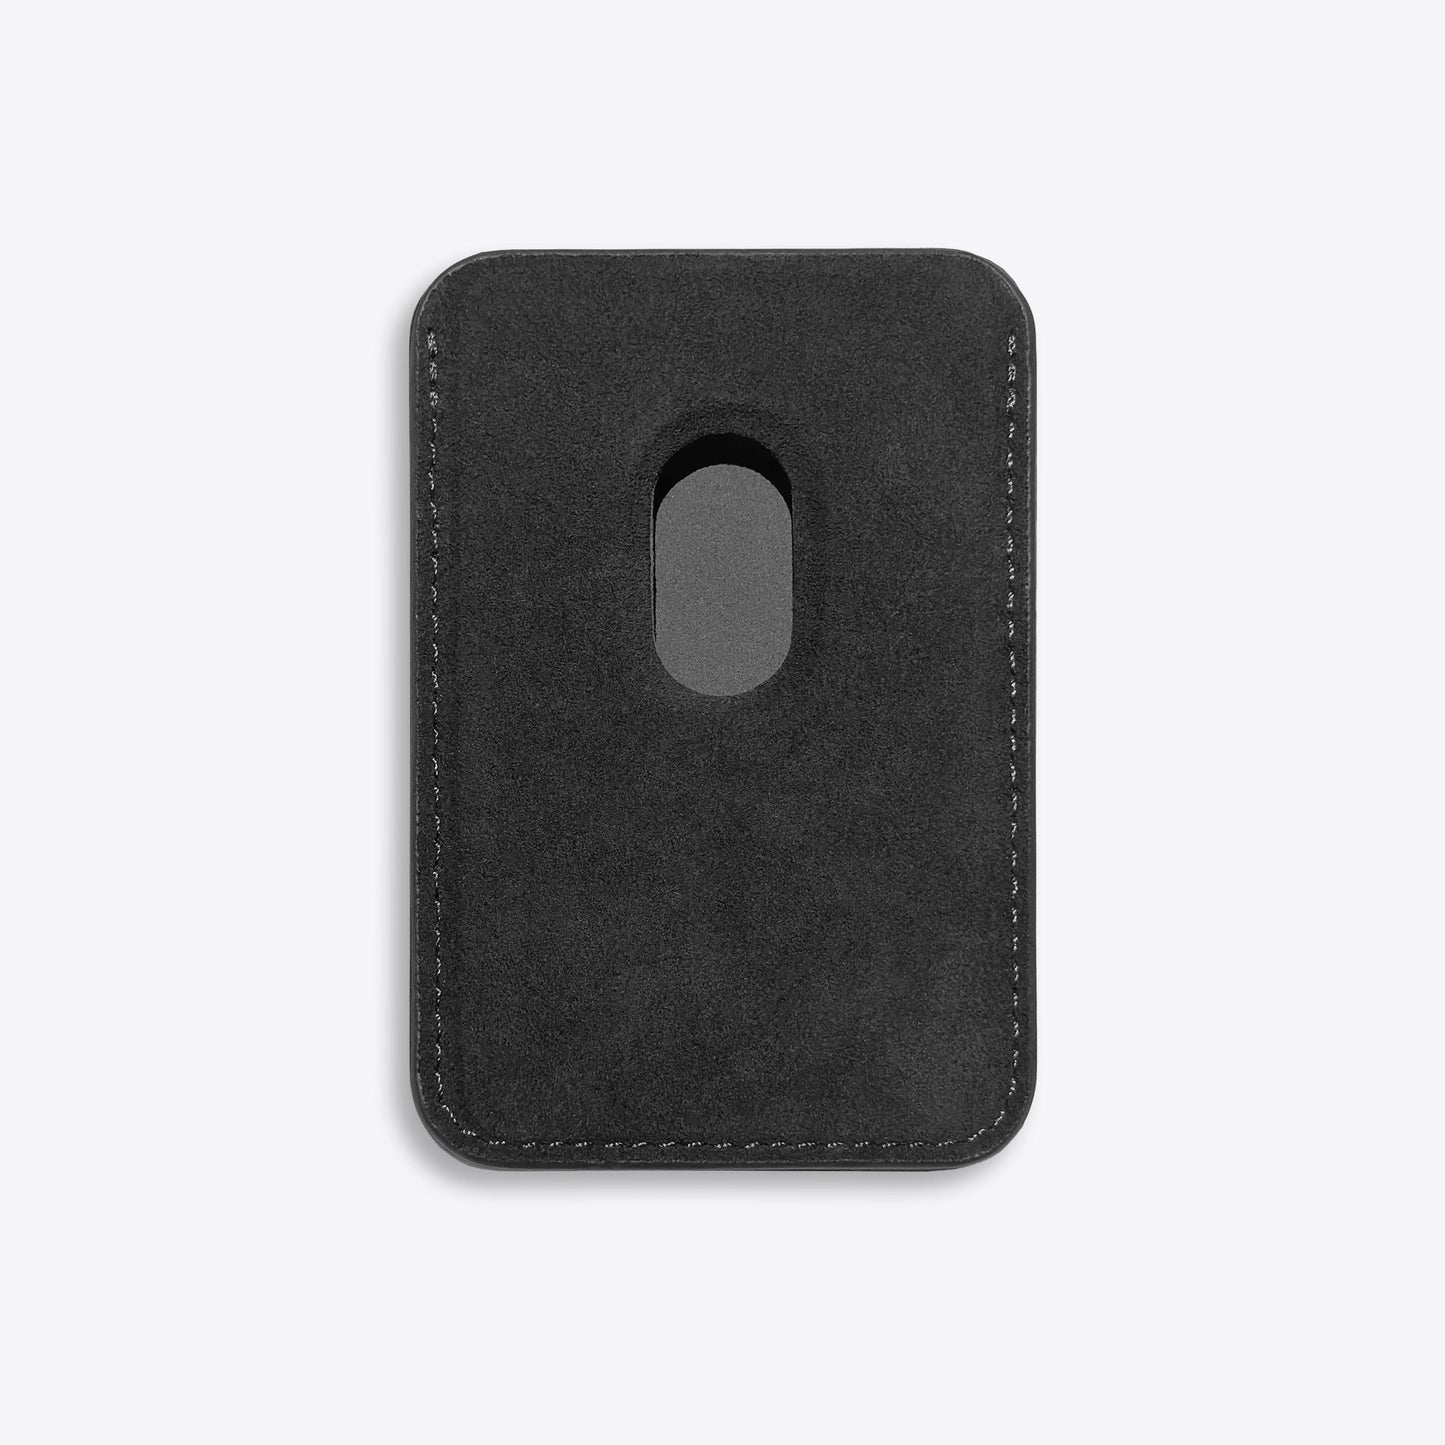 Alcantara Suede Leather iPhone Case and Accessories Collection - The Sticky Cardholder - Charcoal Black - Luriax